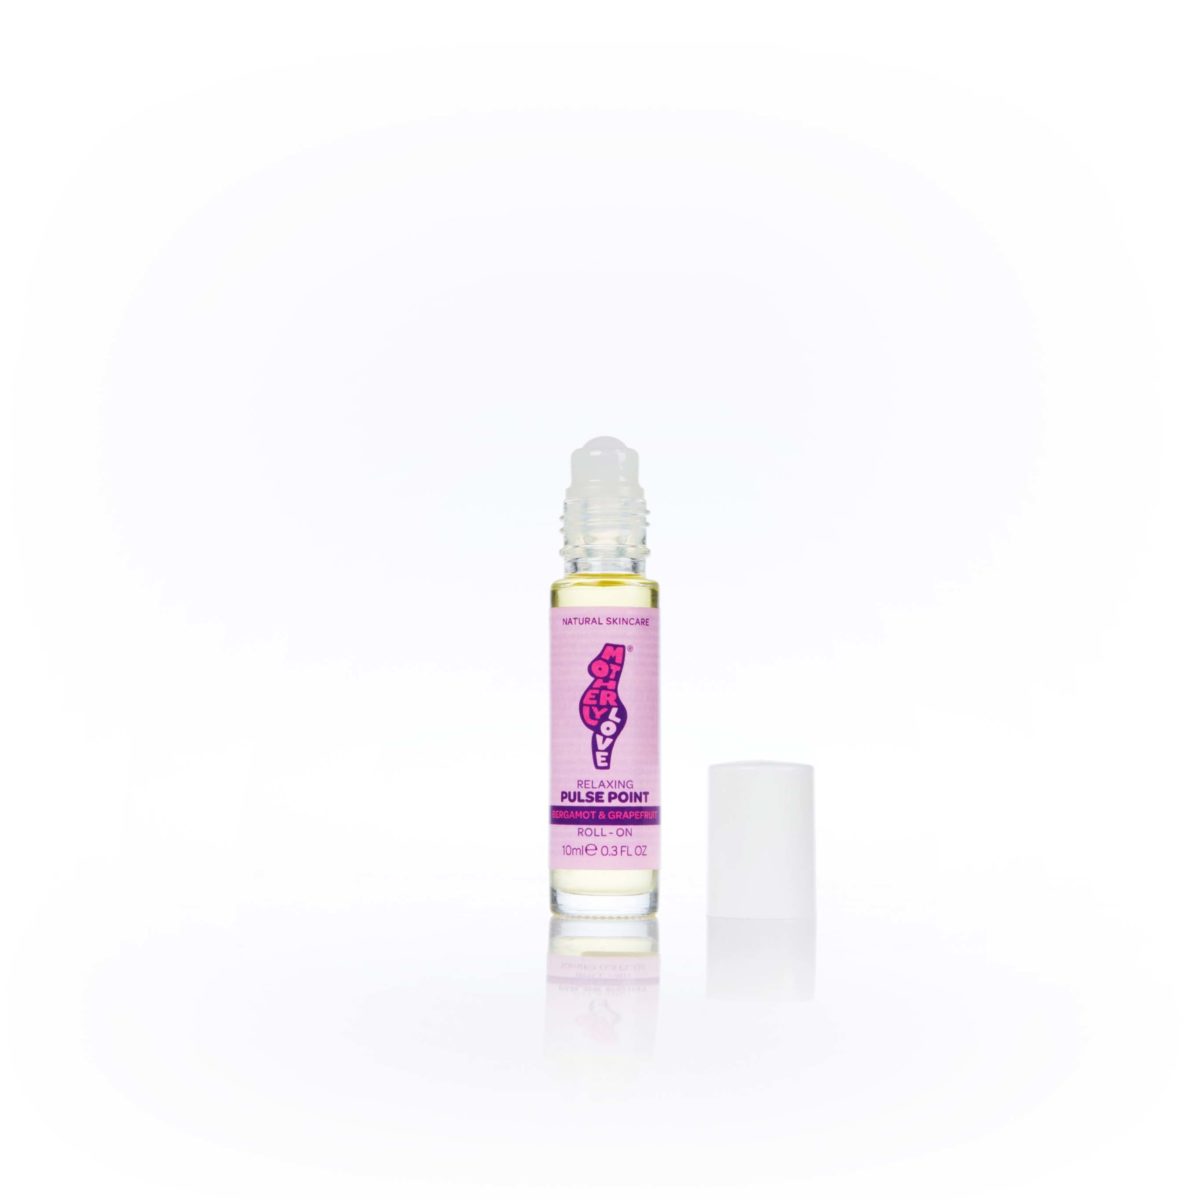 Pulse Point essential oils 2